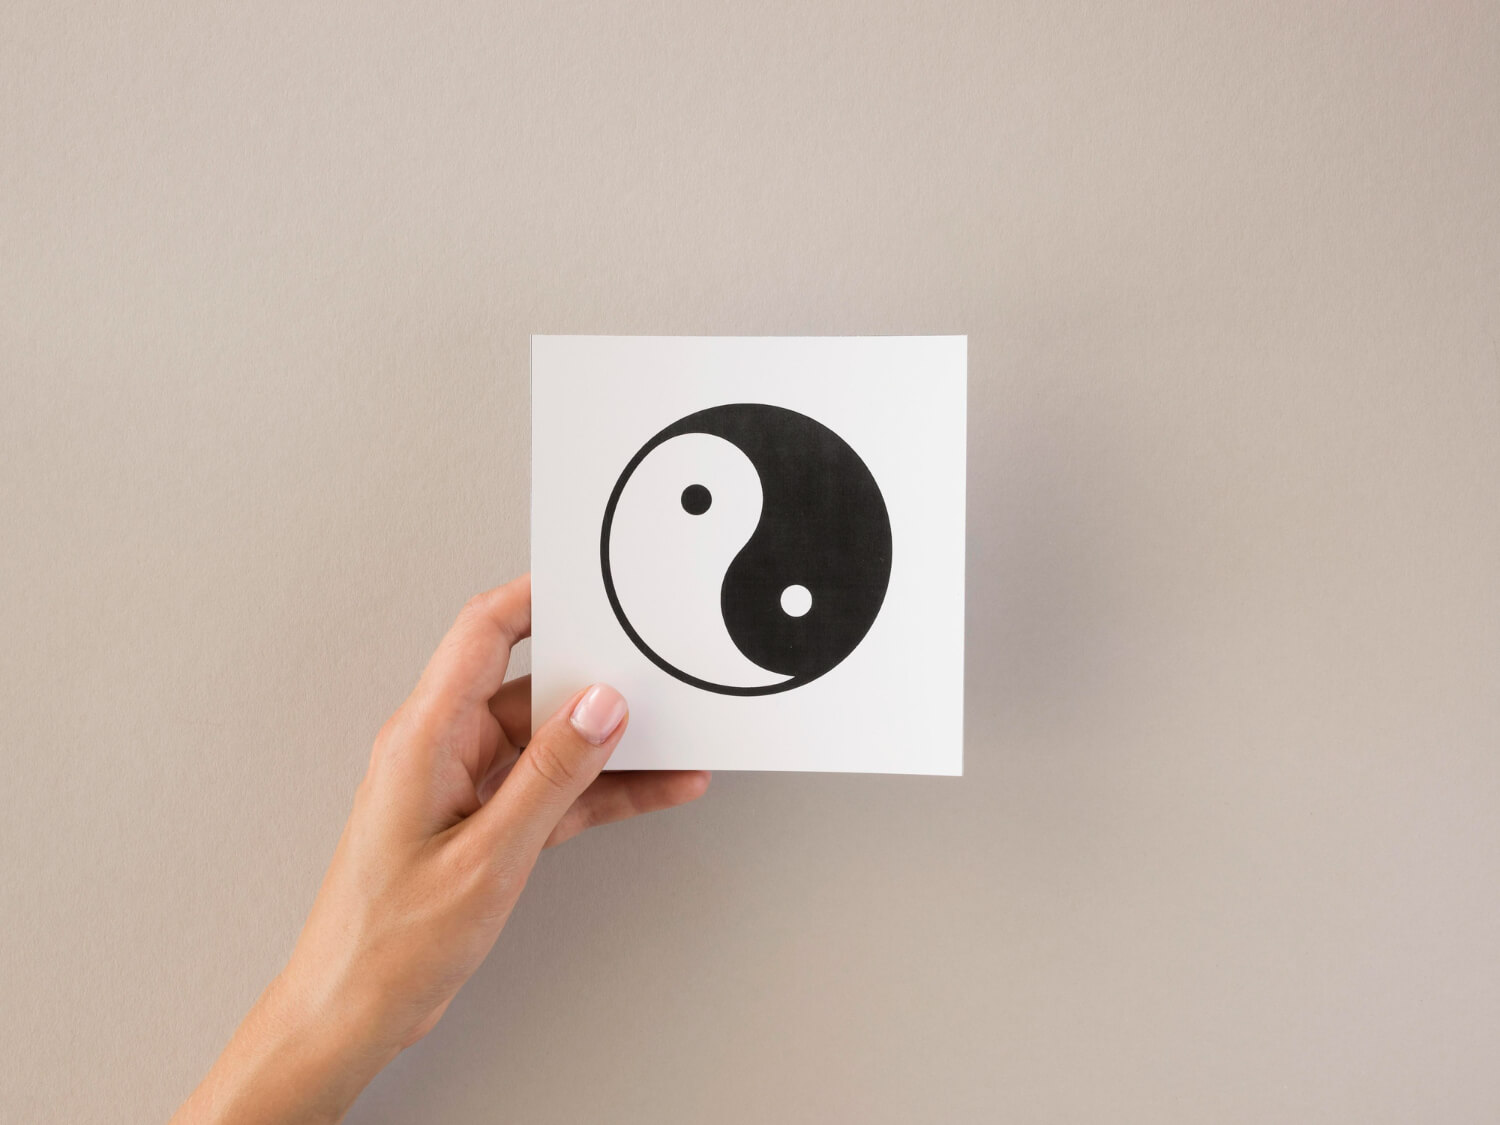 front-view-person-holding-ying-yang-symbol